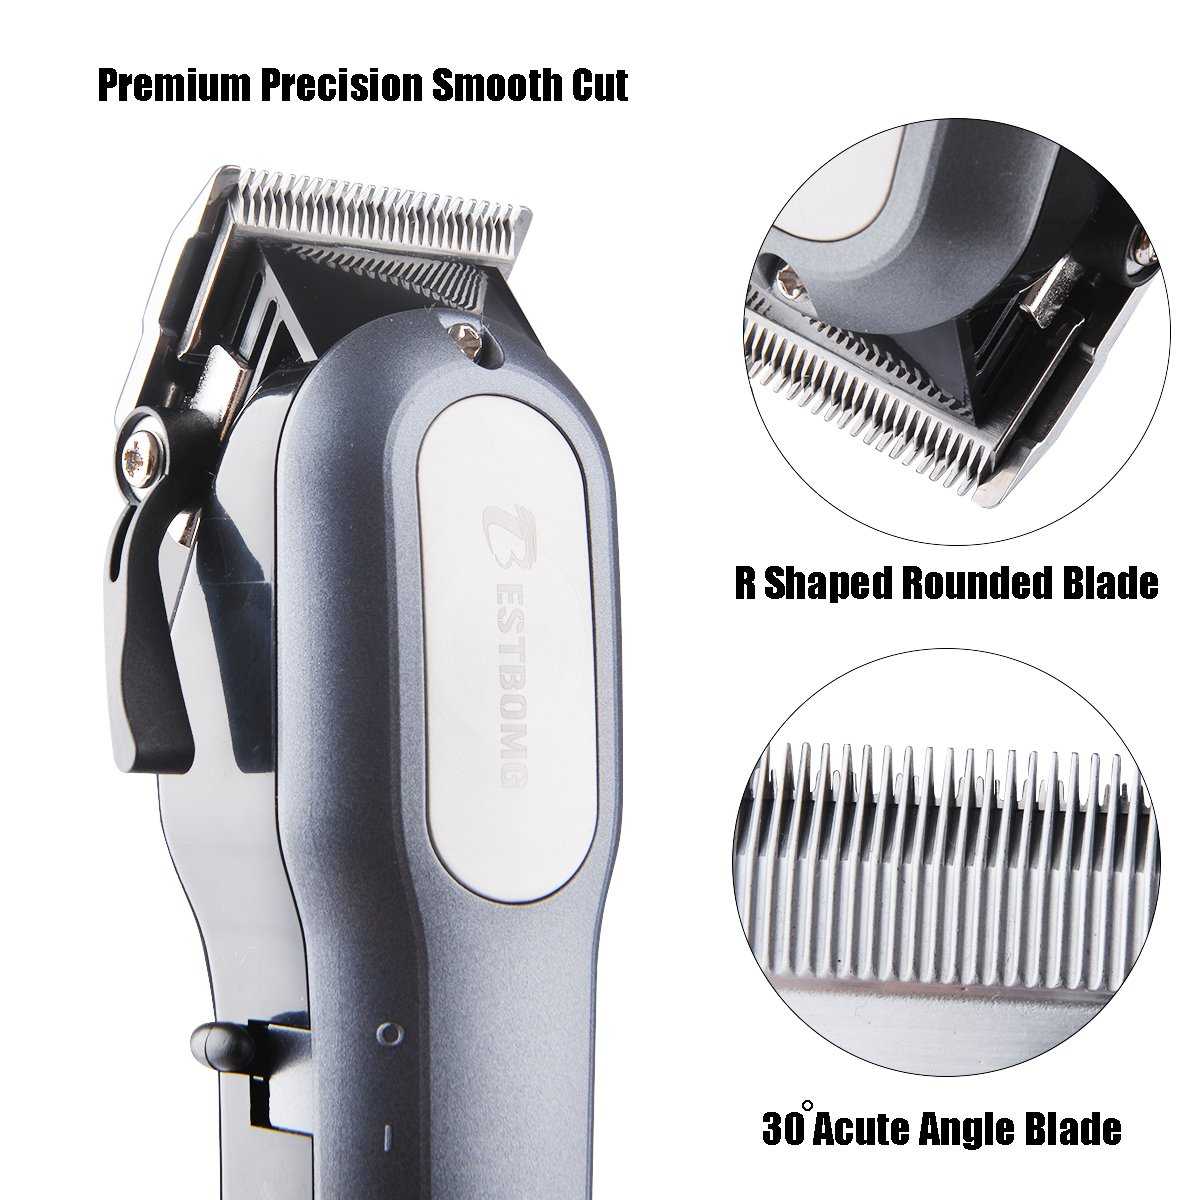 Home Barber Hair Trimmer with Precision Blades Heavy Duty Motor LED Display - 1 